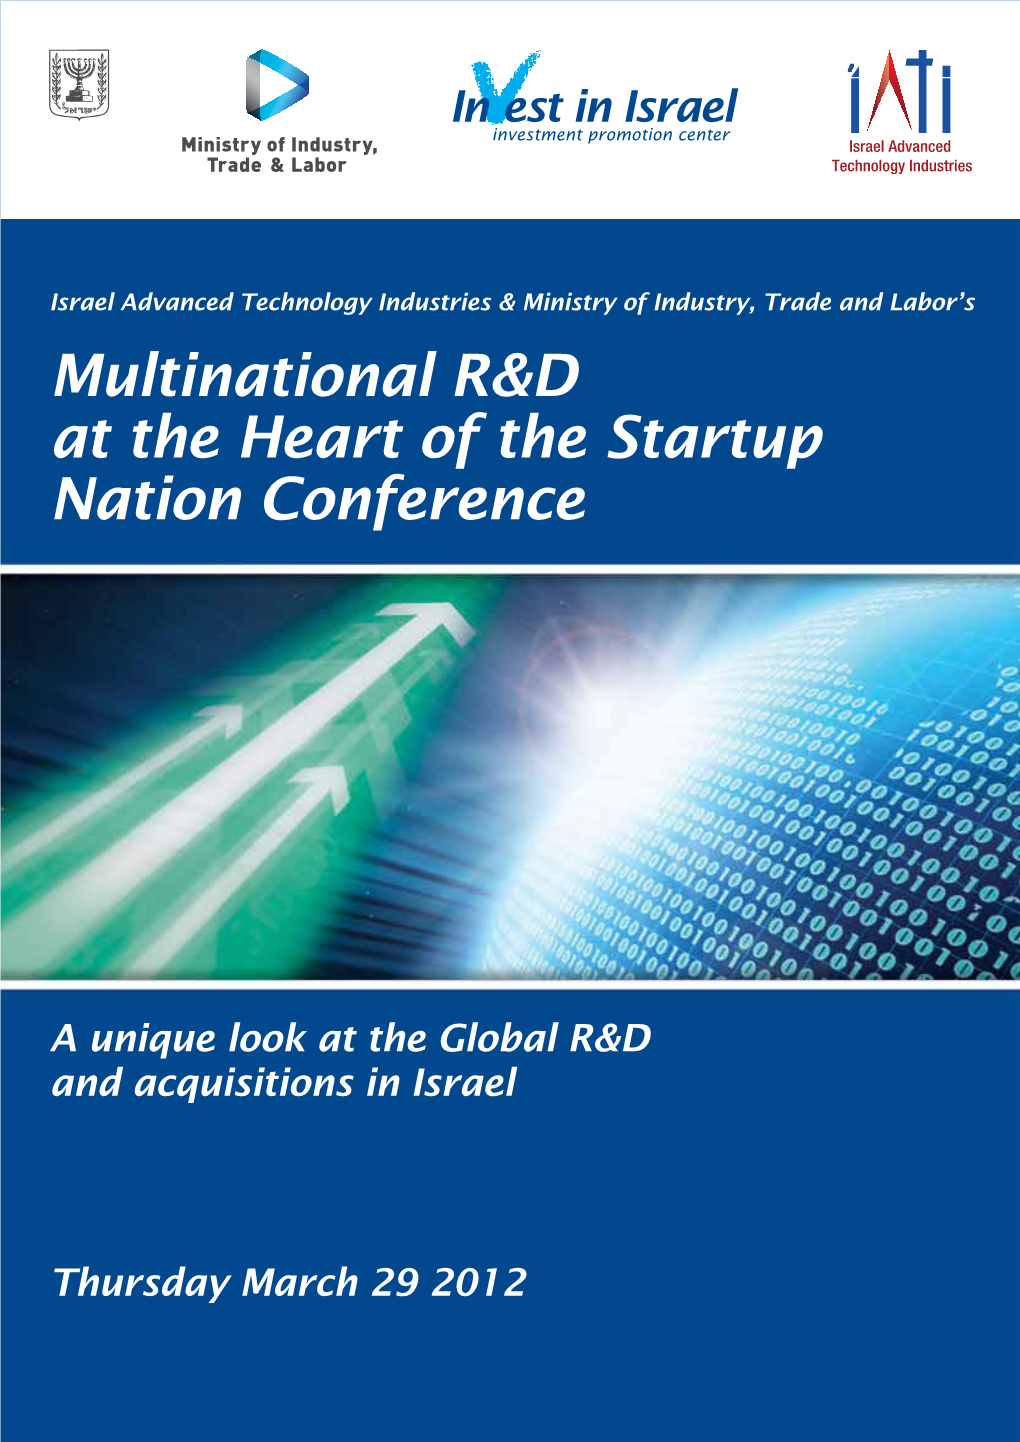 Multinational R&D at the Heart of the Startup Nation Conference